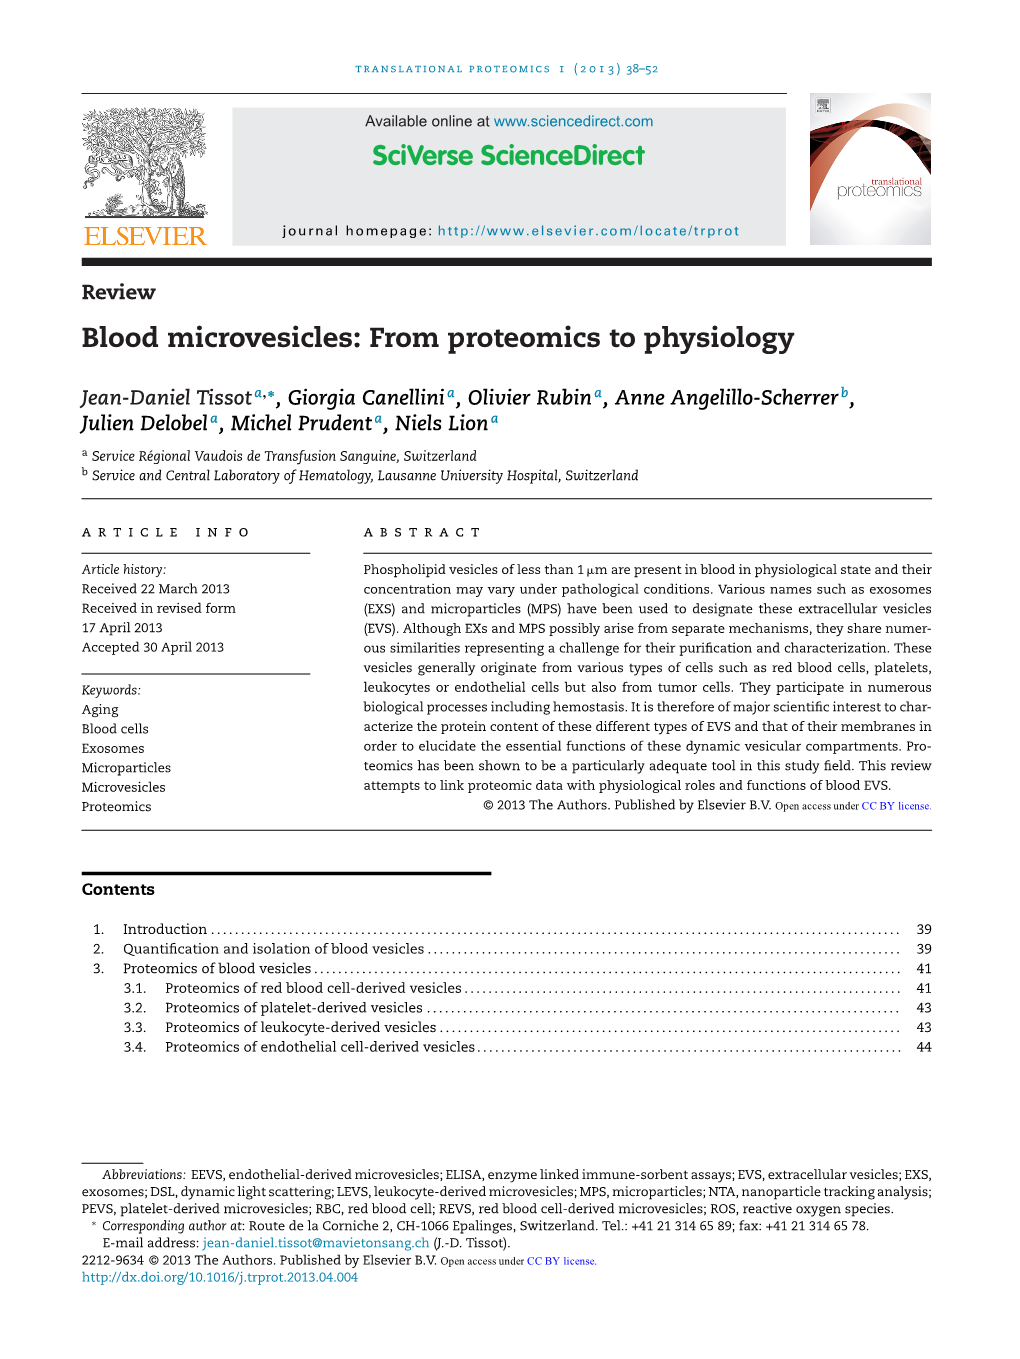 Blood Microvesicles: from Proteomics to Physiology